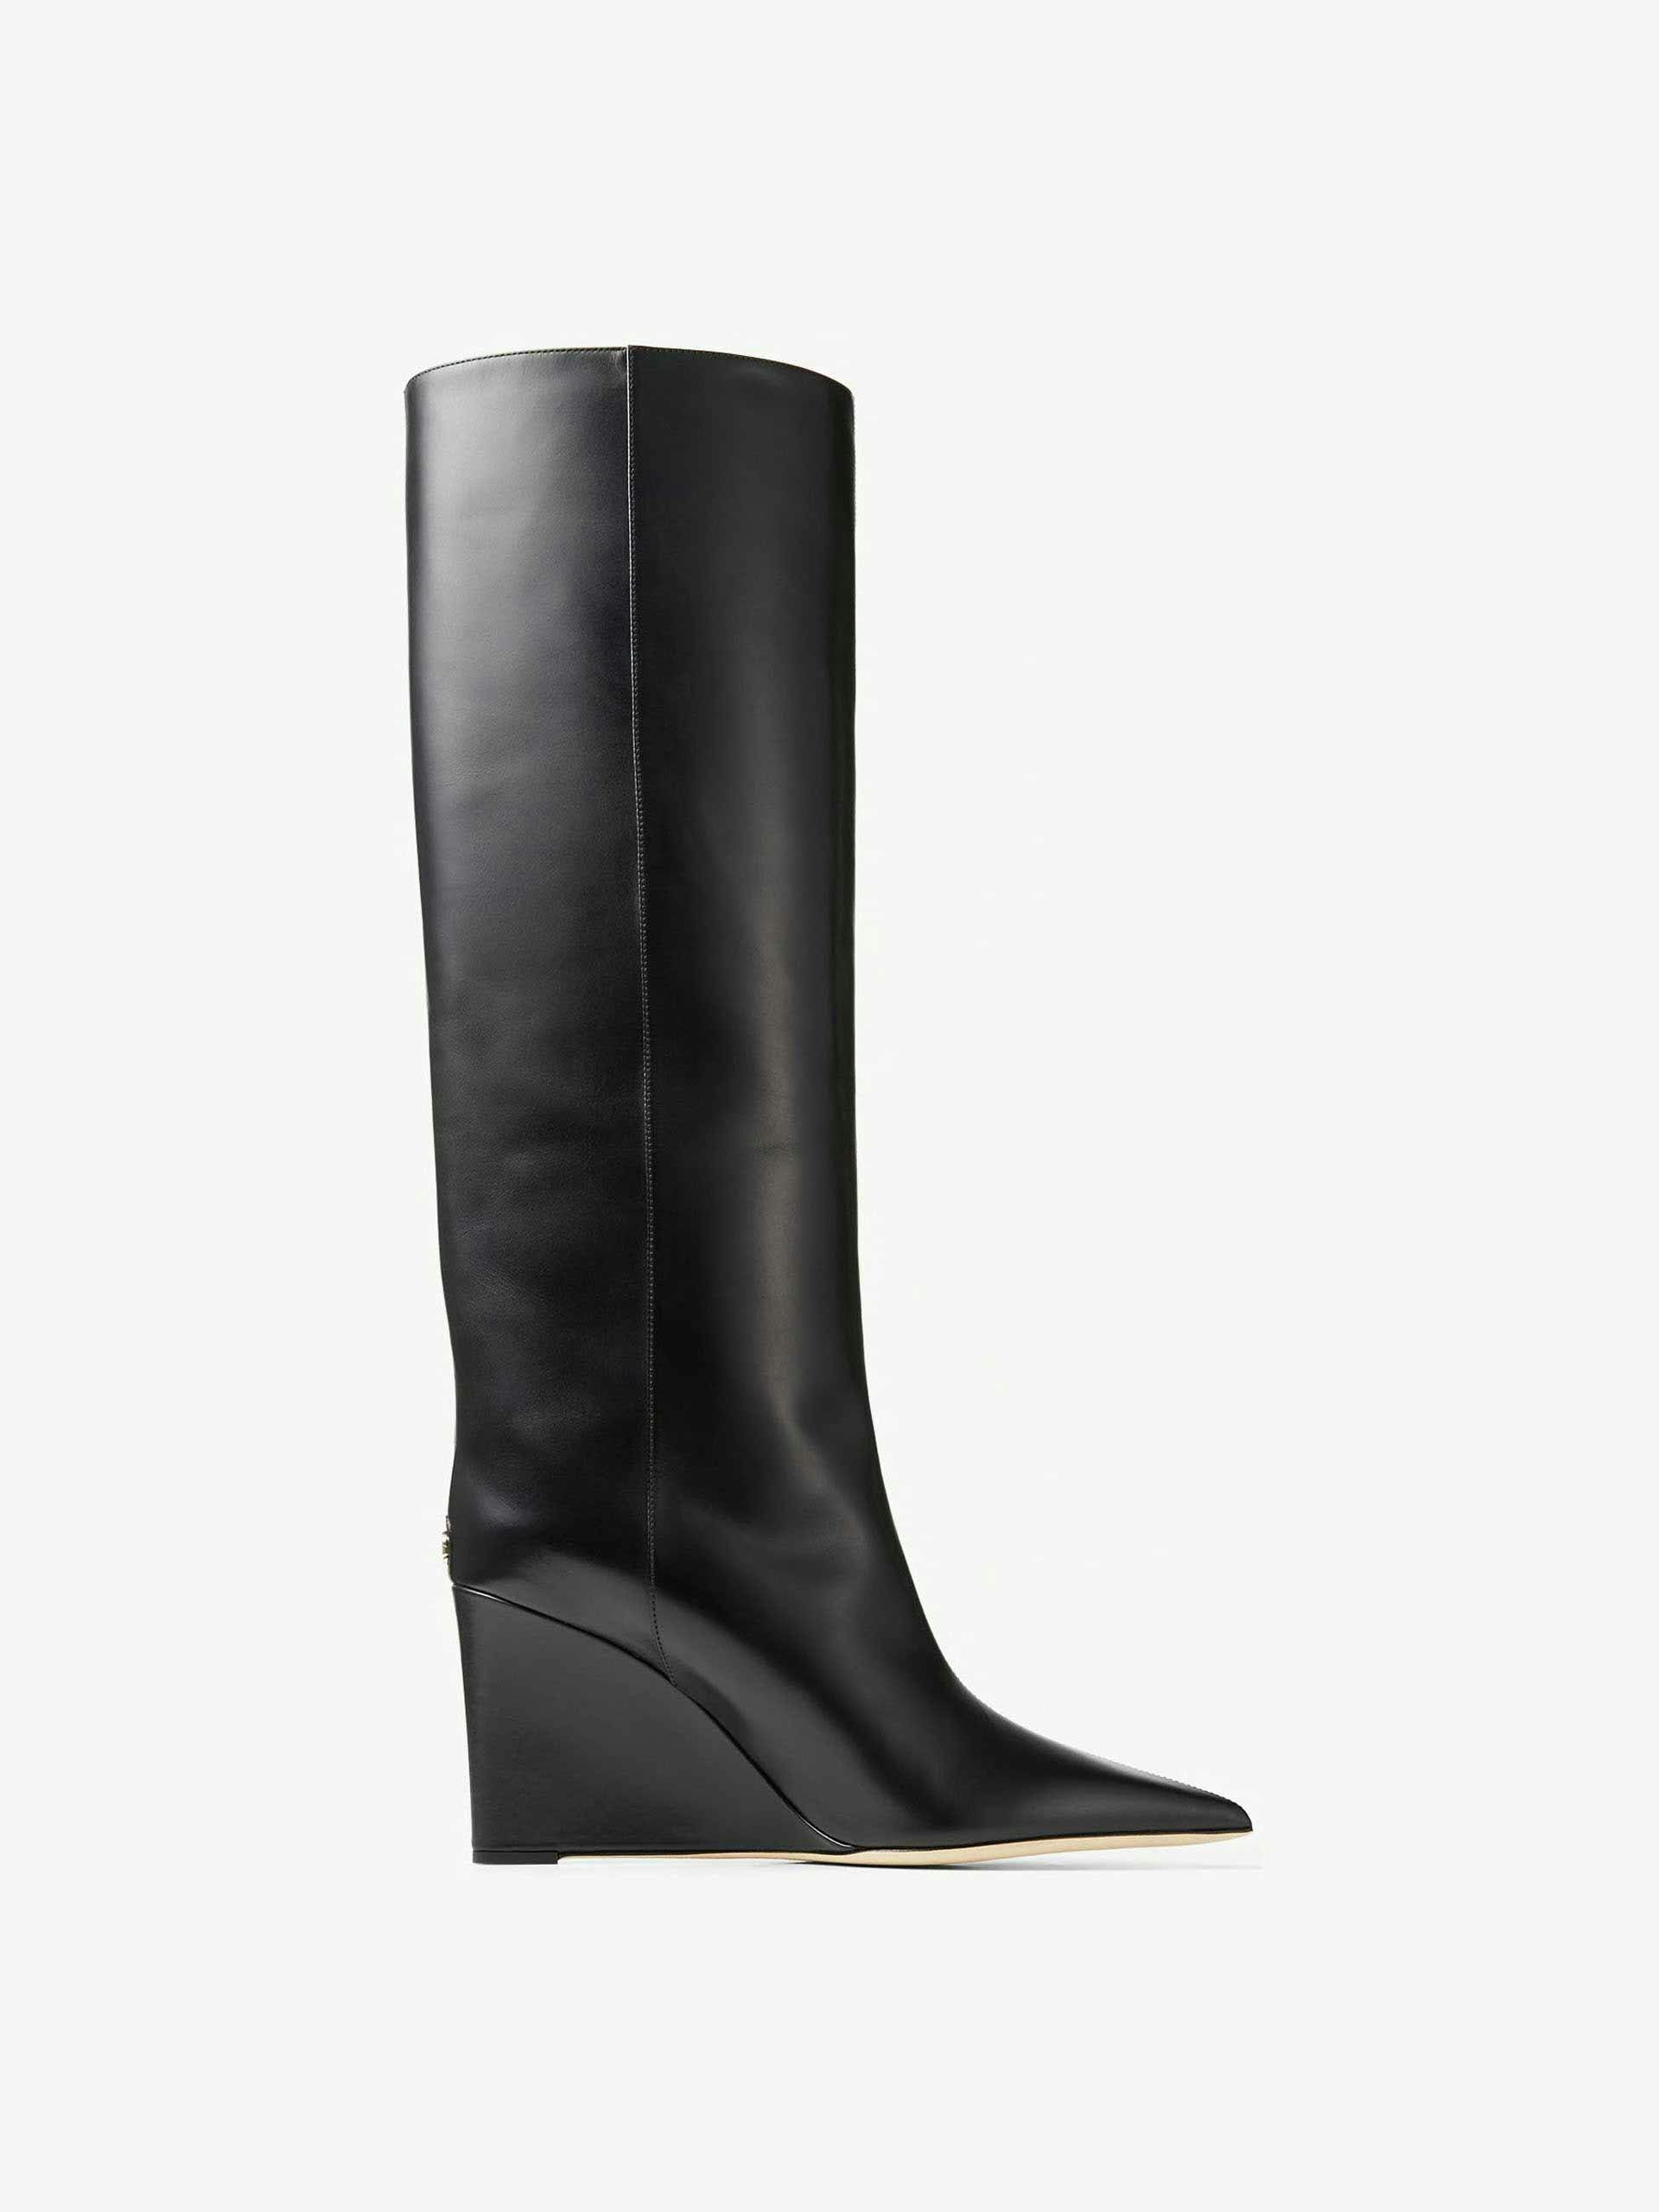 Black leather wedge knee-high boots